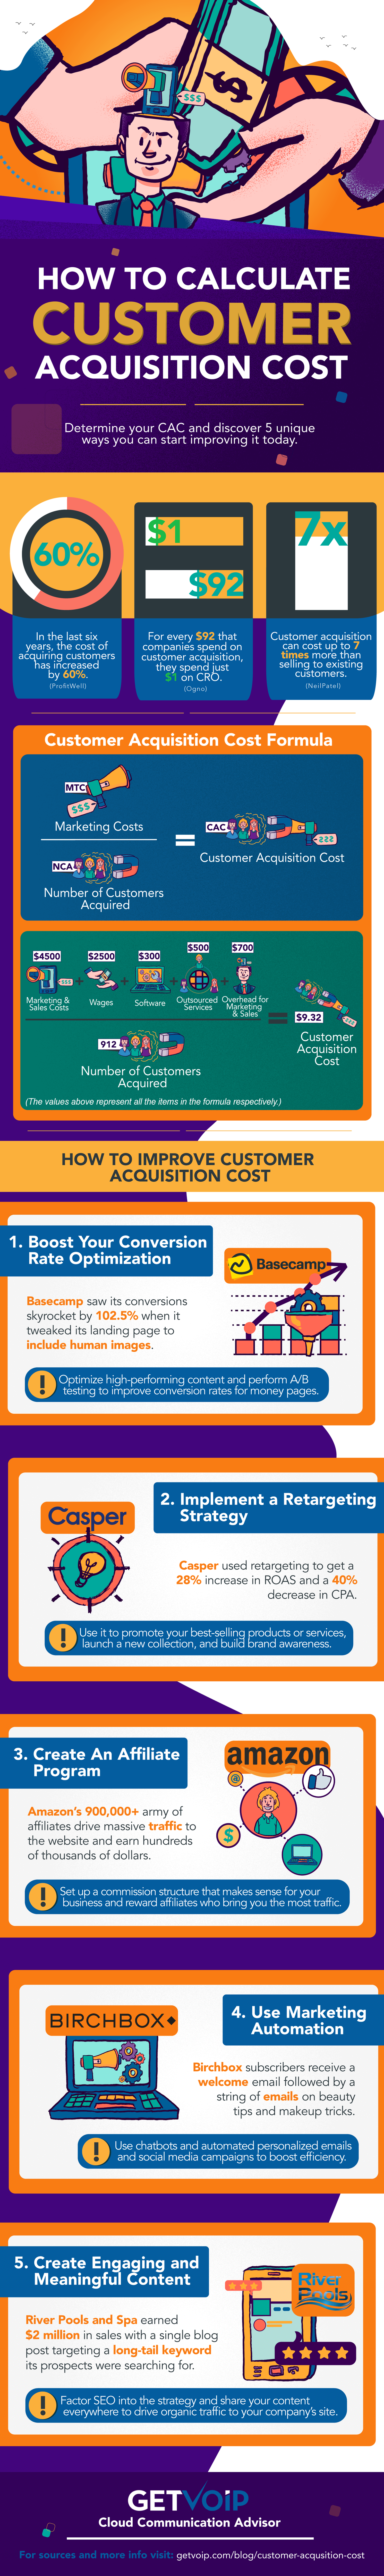 infographic - how to calculate customer acquisition cost (CAC)